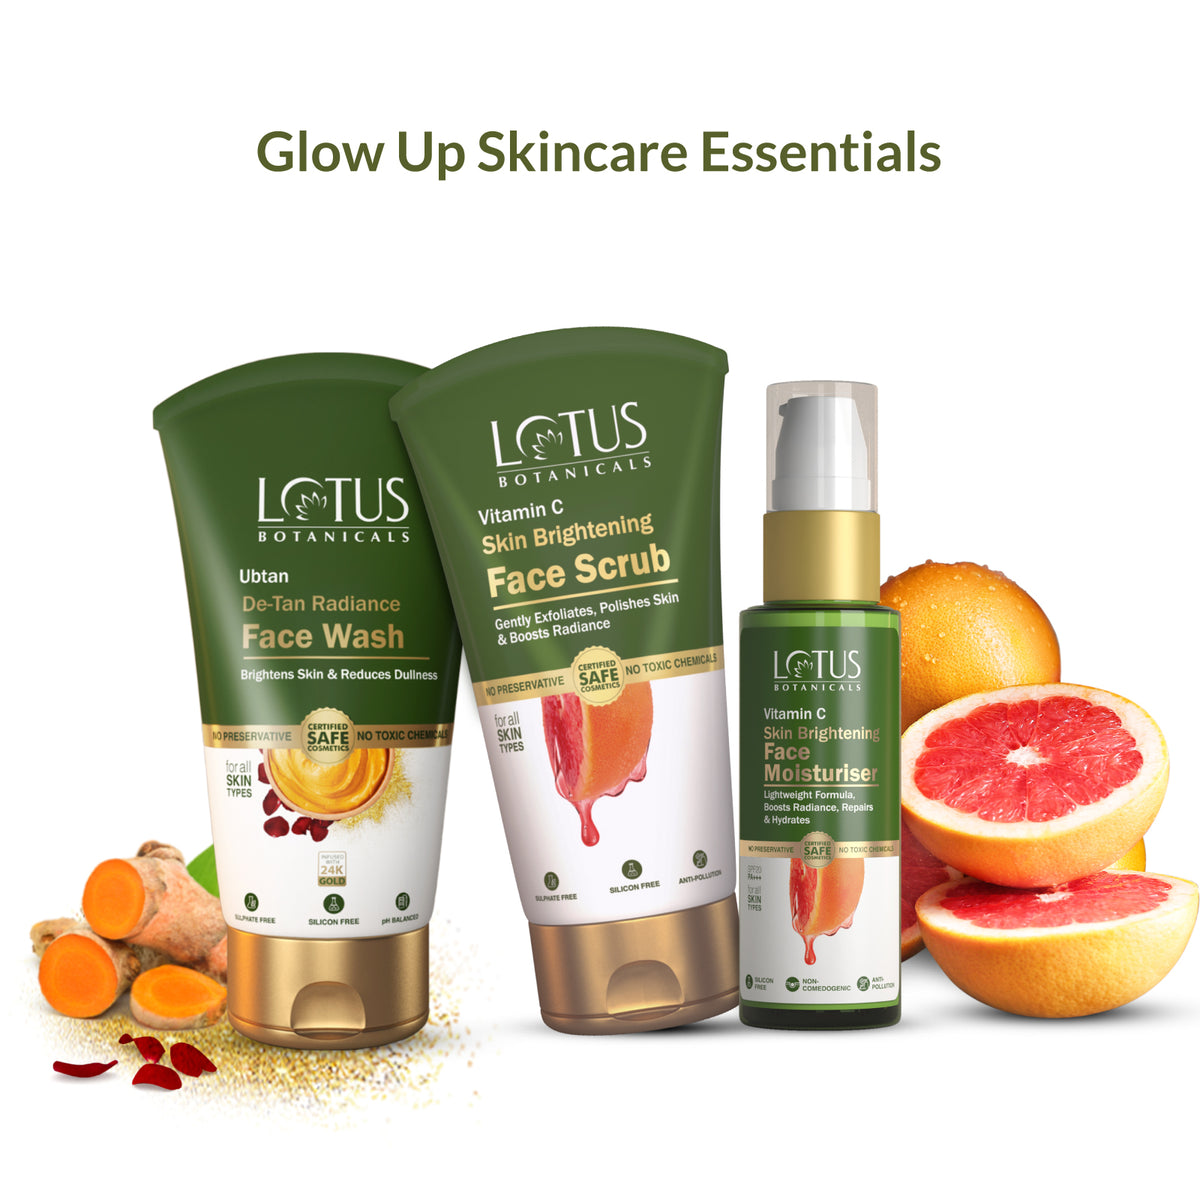 Image featuring a glowing skincare routine with essential products for a transformative skincare journey.